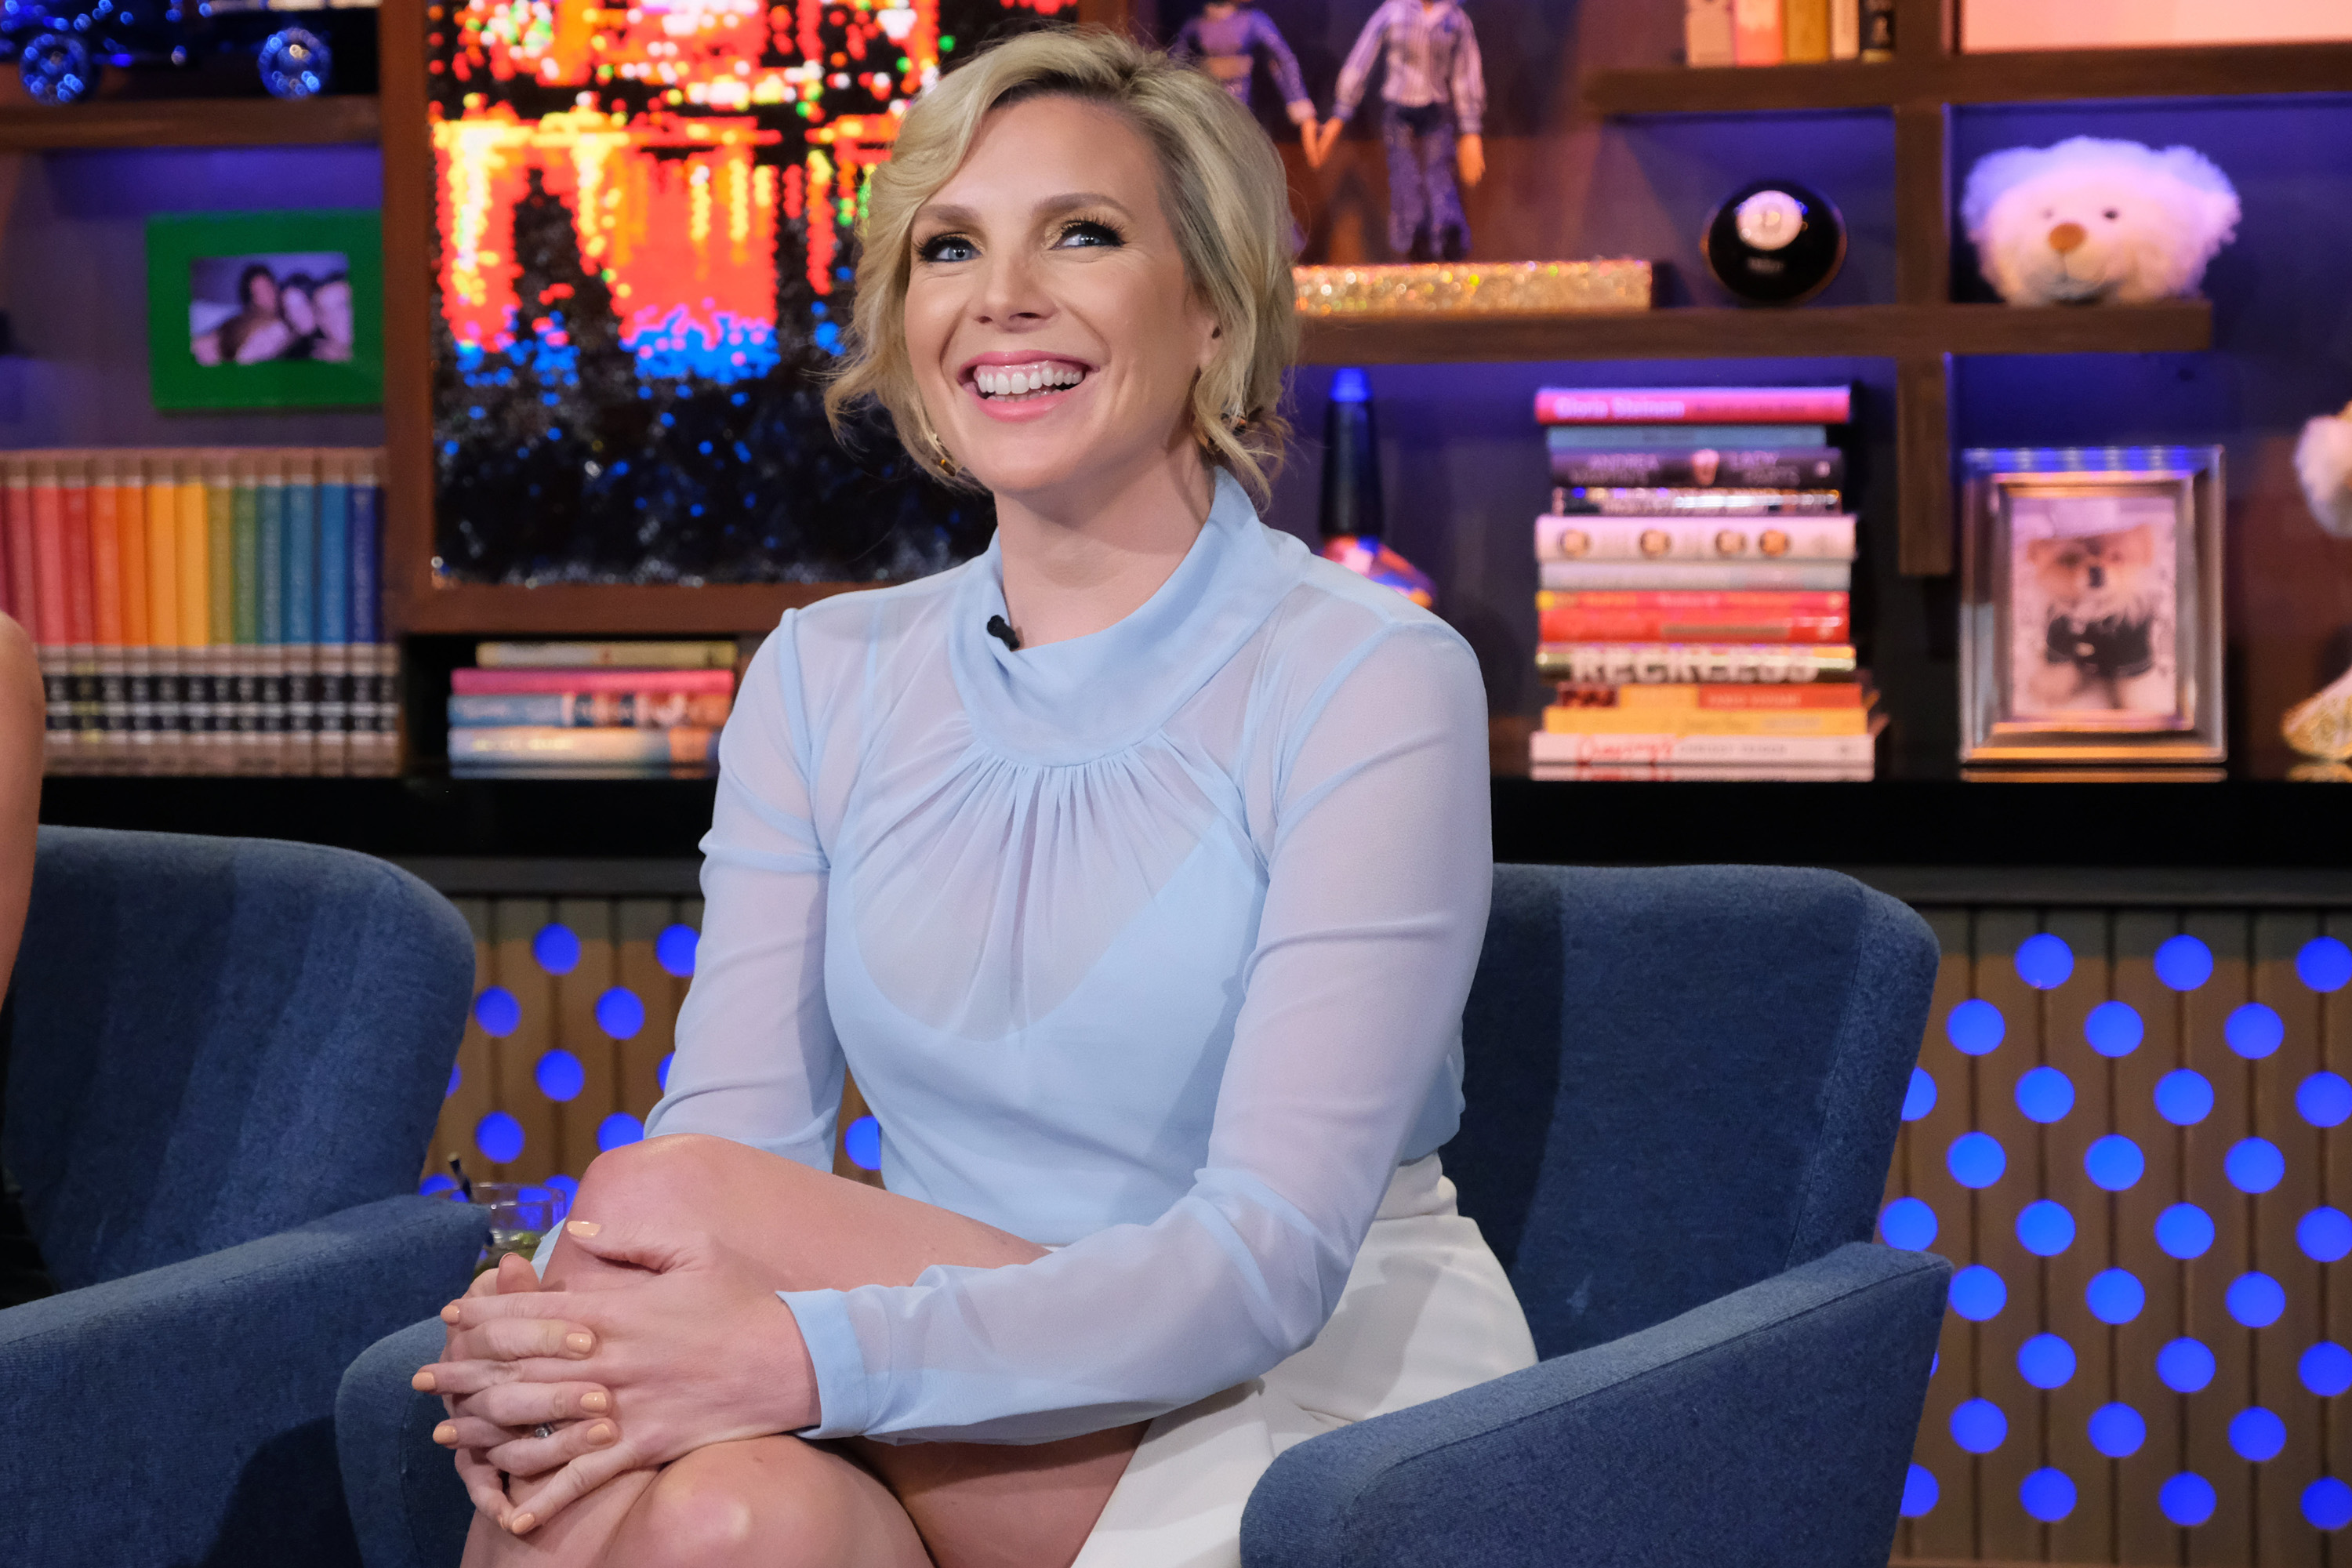 June Diane Raphael sits in a chair and smiles. She is wearing a a long-sleeved blue see-through top and a white skirt.